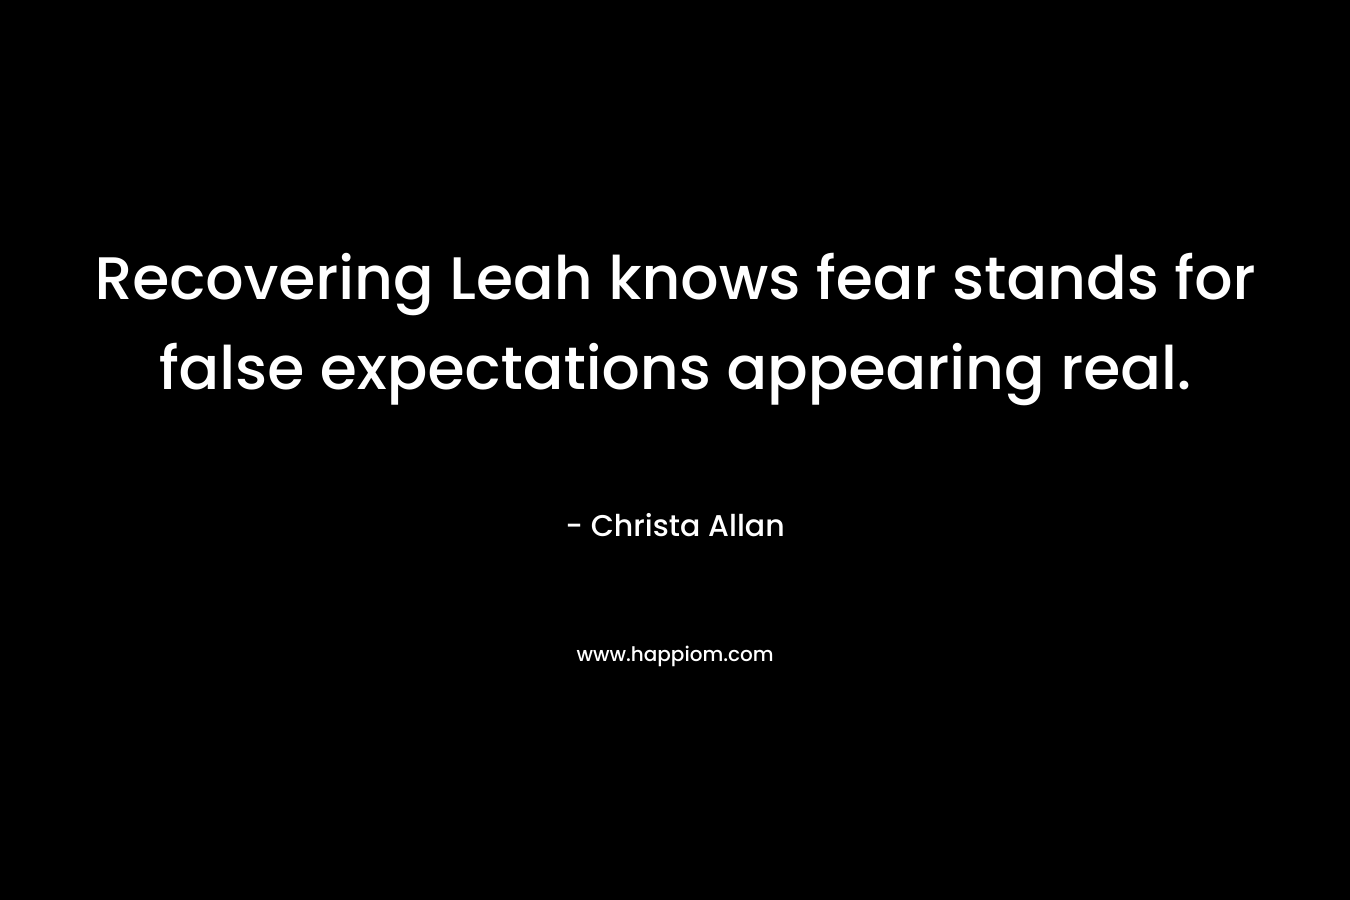 Recovering Leah knows fear stands for false expectations appearing real. – Christa Allan